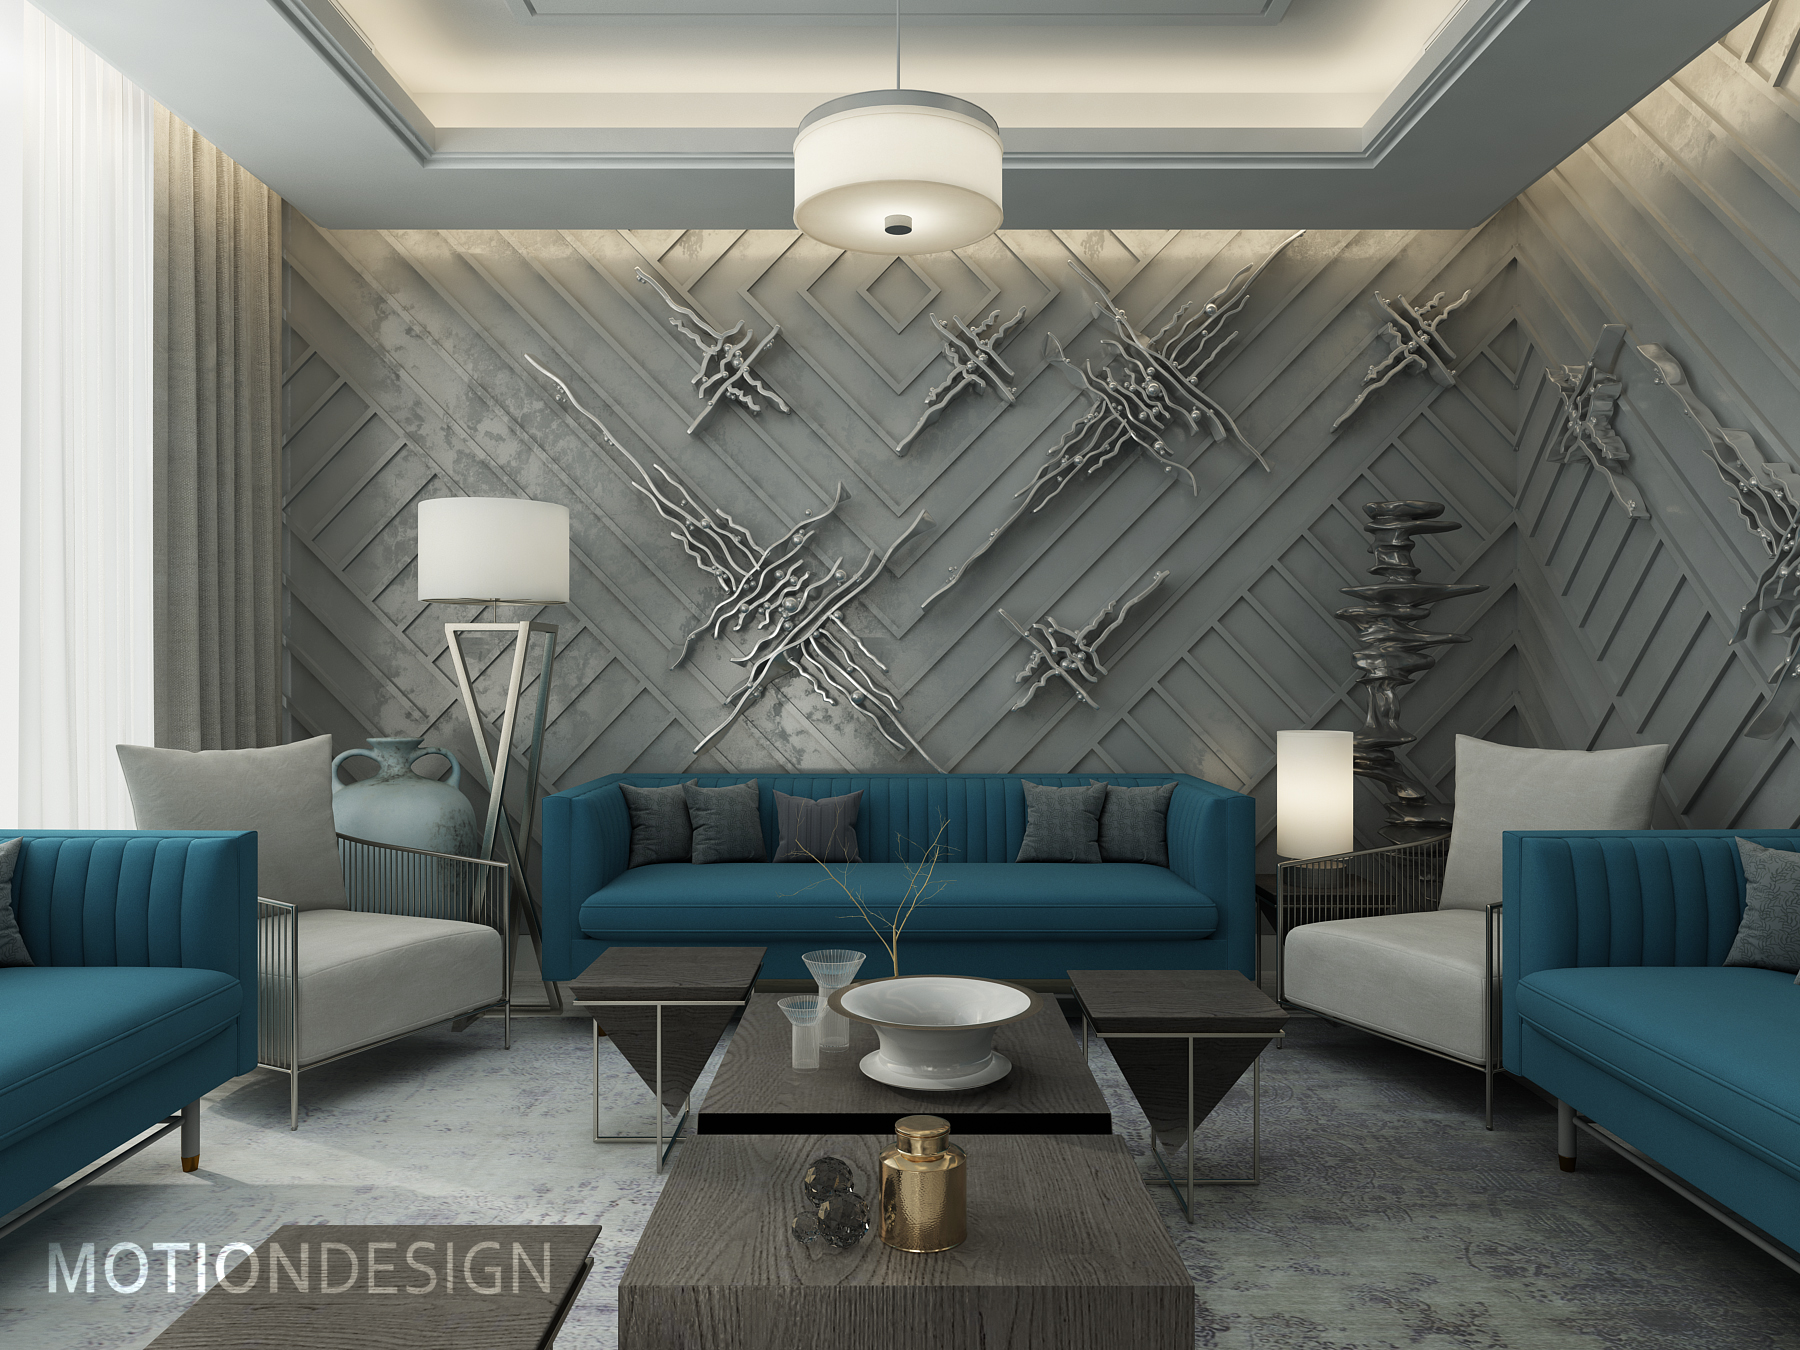 Motion Upholstered Seats. Motion designed a blue colour palette living room with two grey armchairs and luxury elements to fill the space.